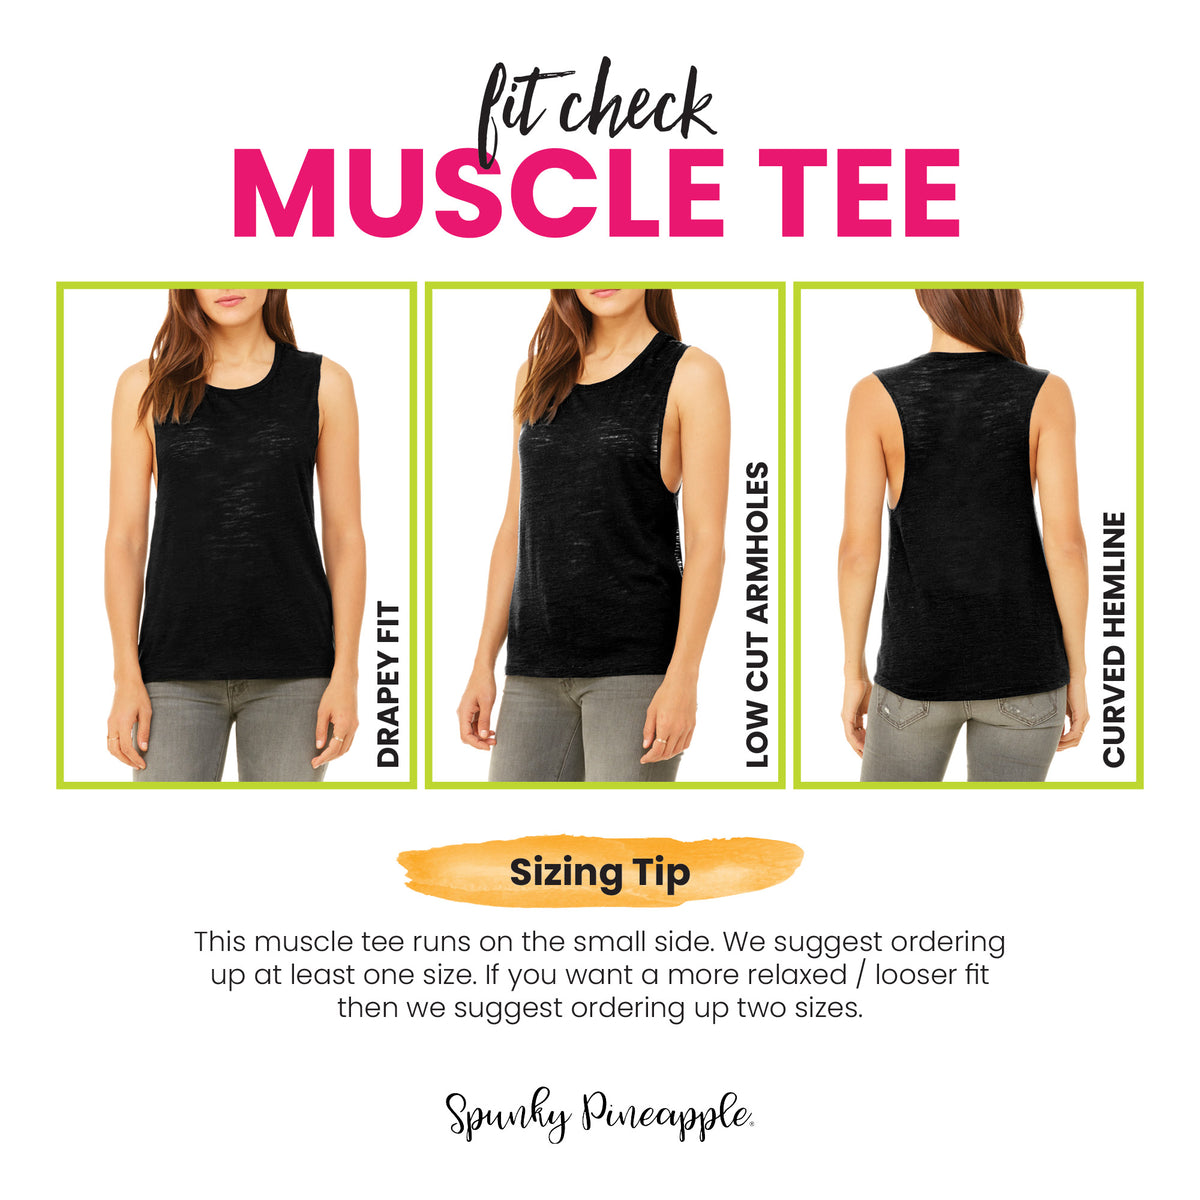 Oh, Tuck Muscle Tee